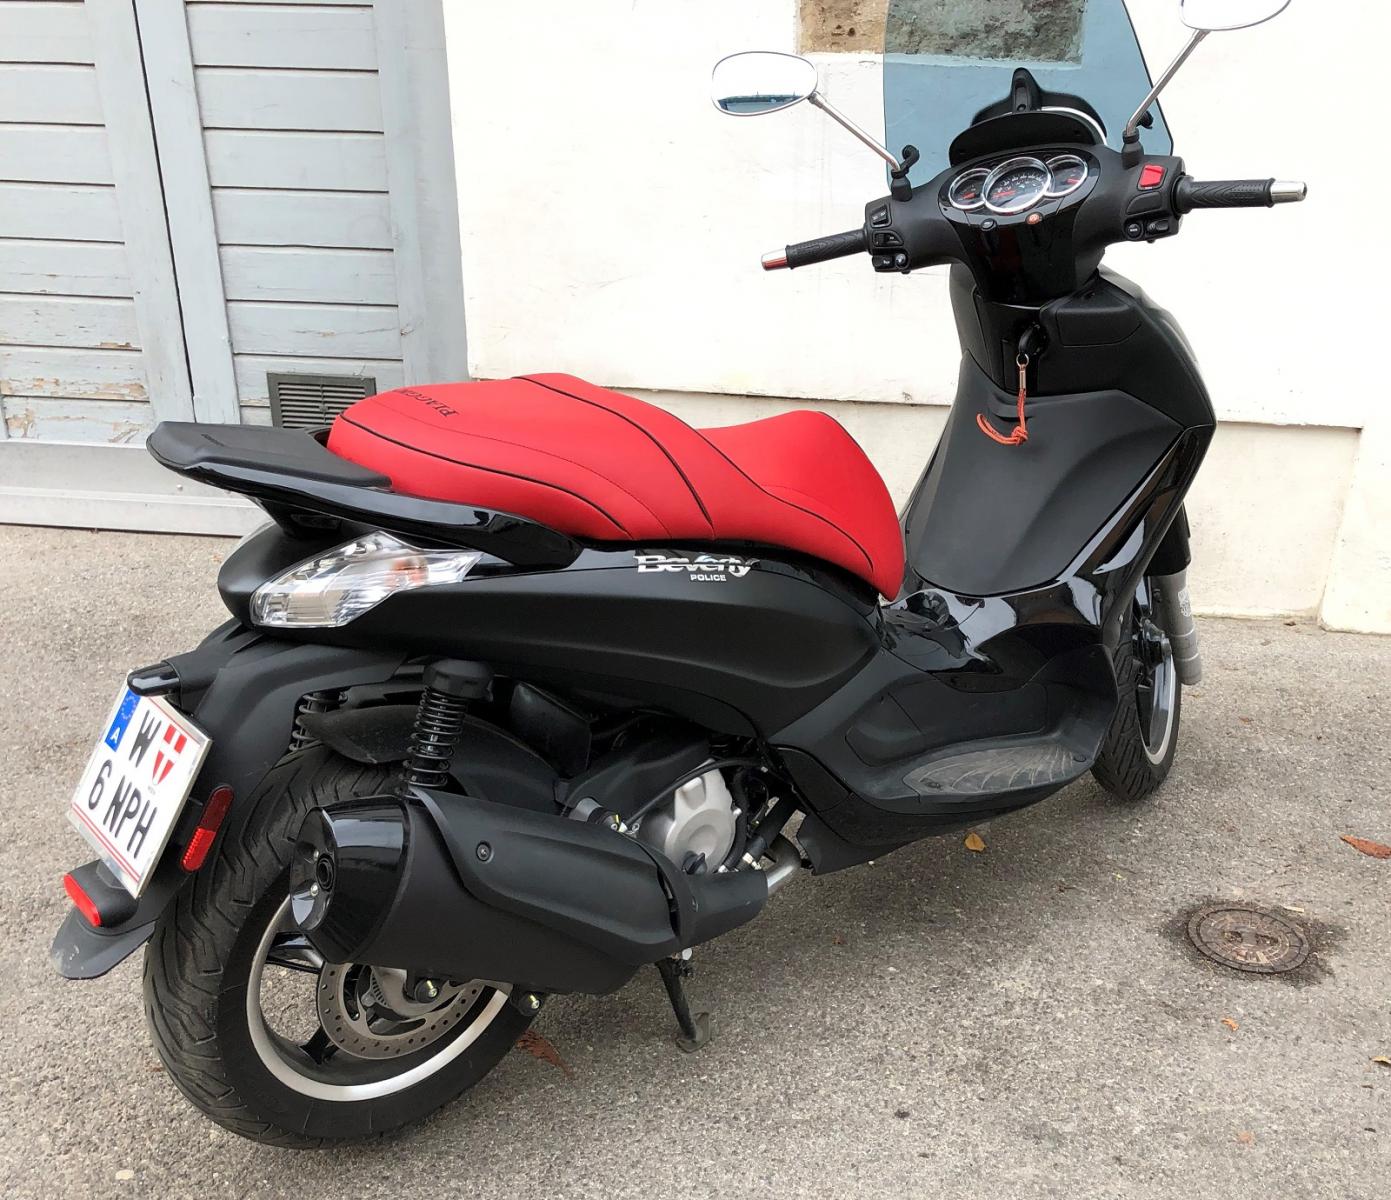 PIAGGIO BEVERLY 350 - Deluxe seats, bags, leg and handgrip covers